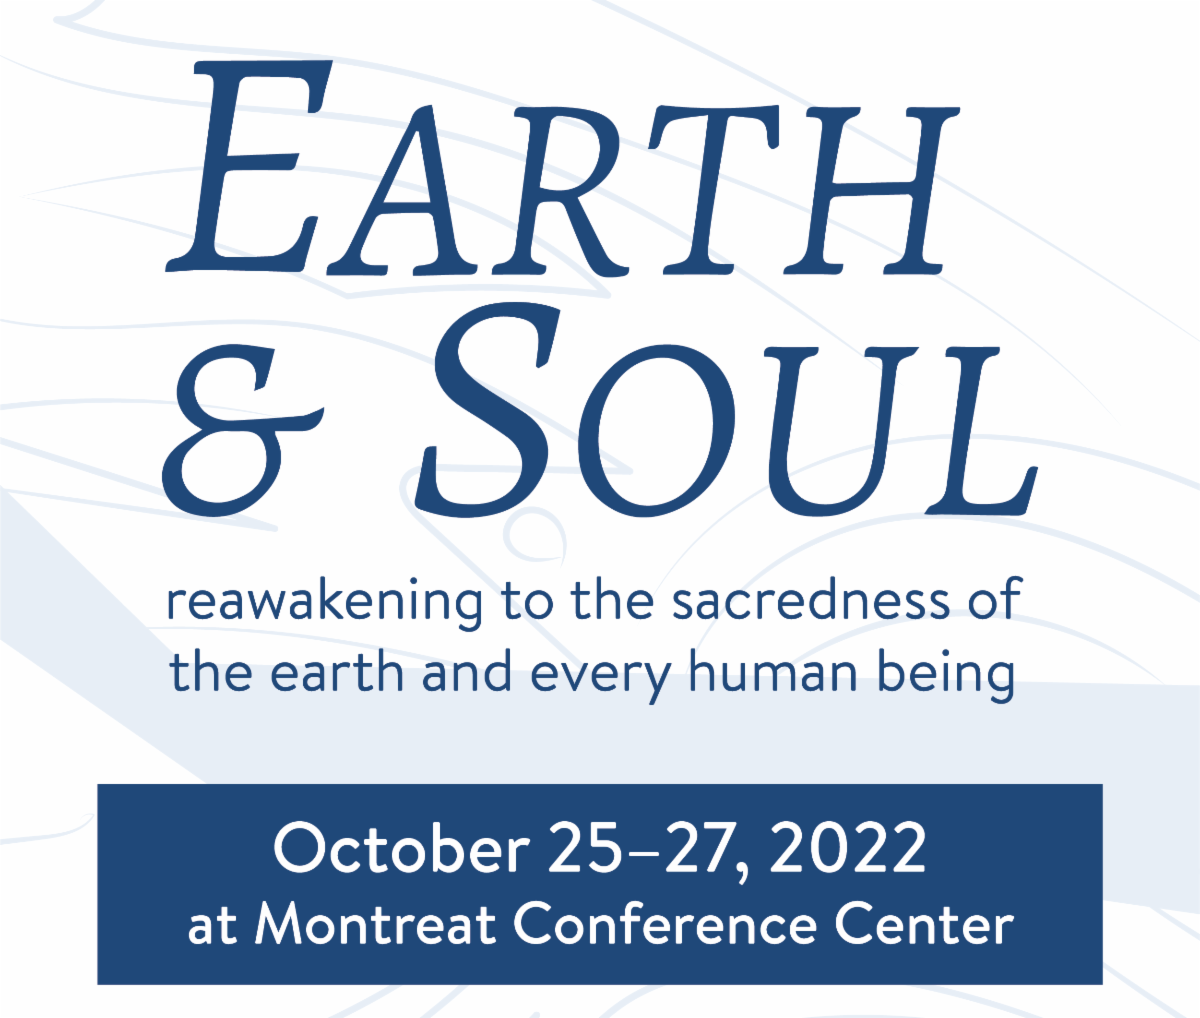 Earth & Soul - Reawakening to the sacredness of the earth and every human being. October 25-27, 2022, at Montreat Conference Center